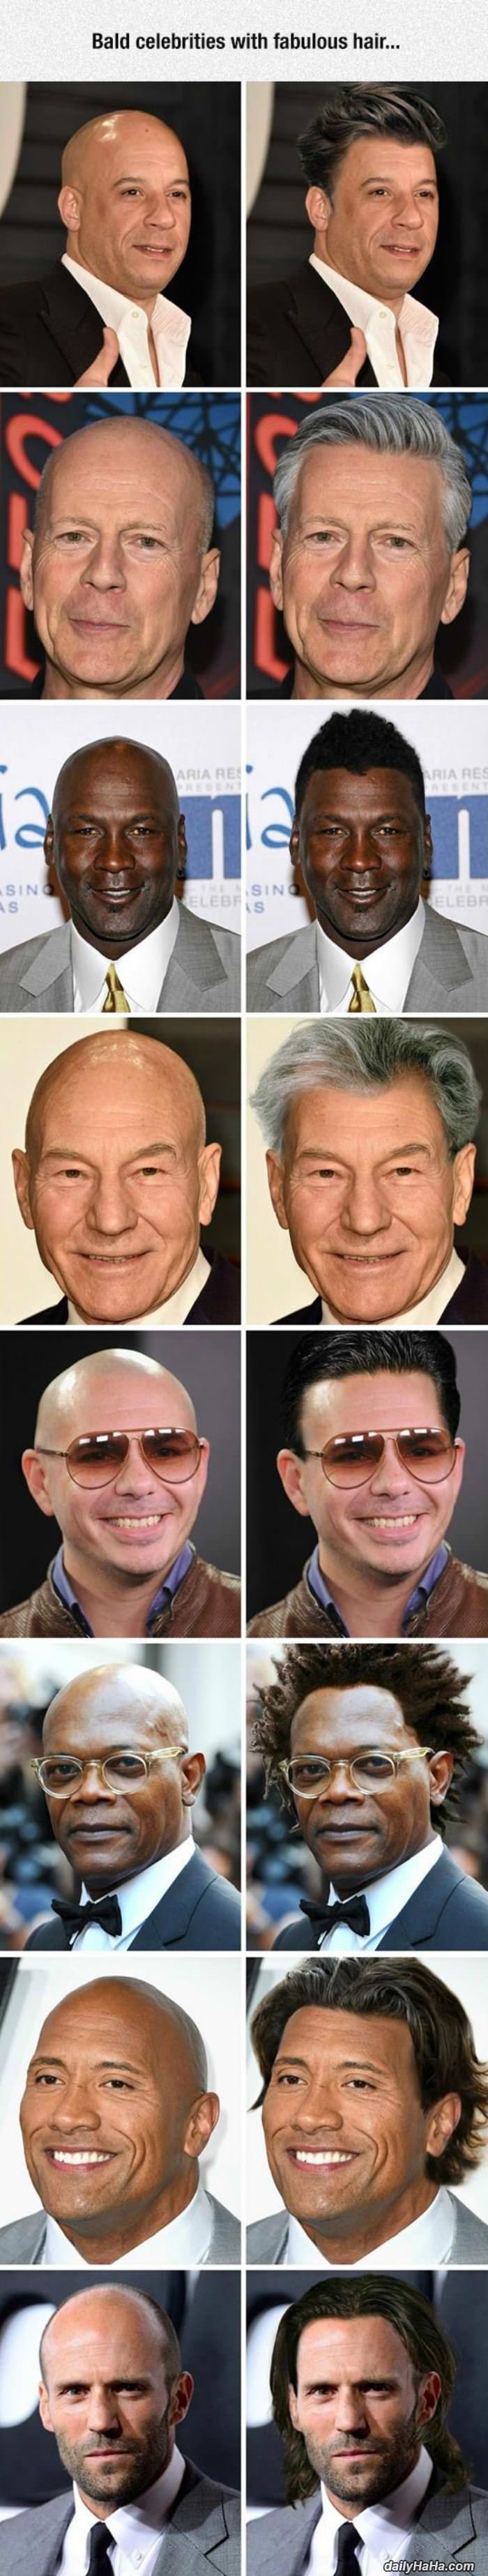 bald celebrities with fabulous hair funny picture